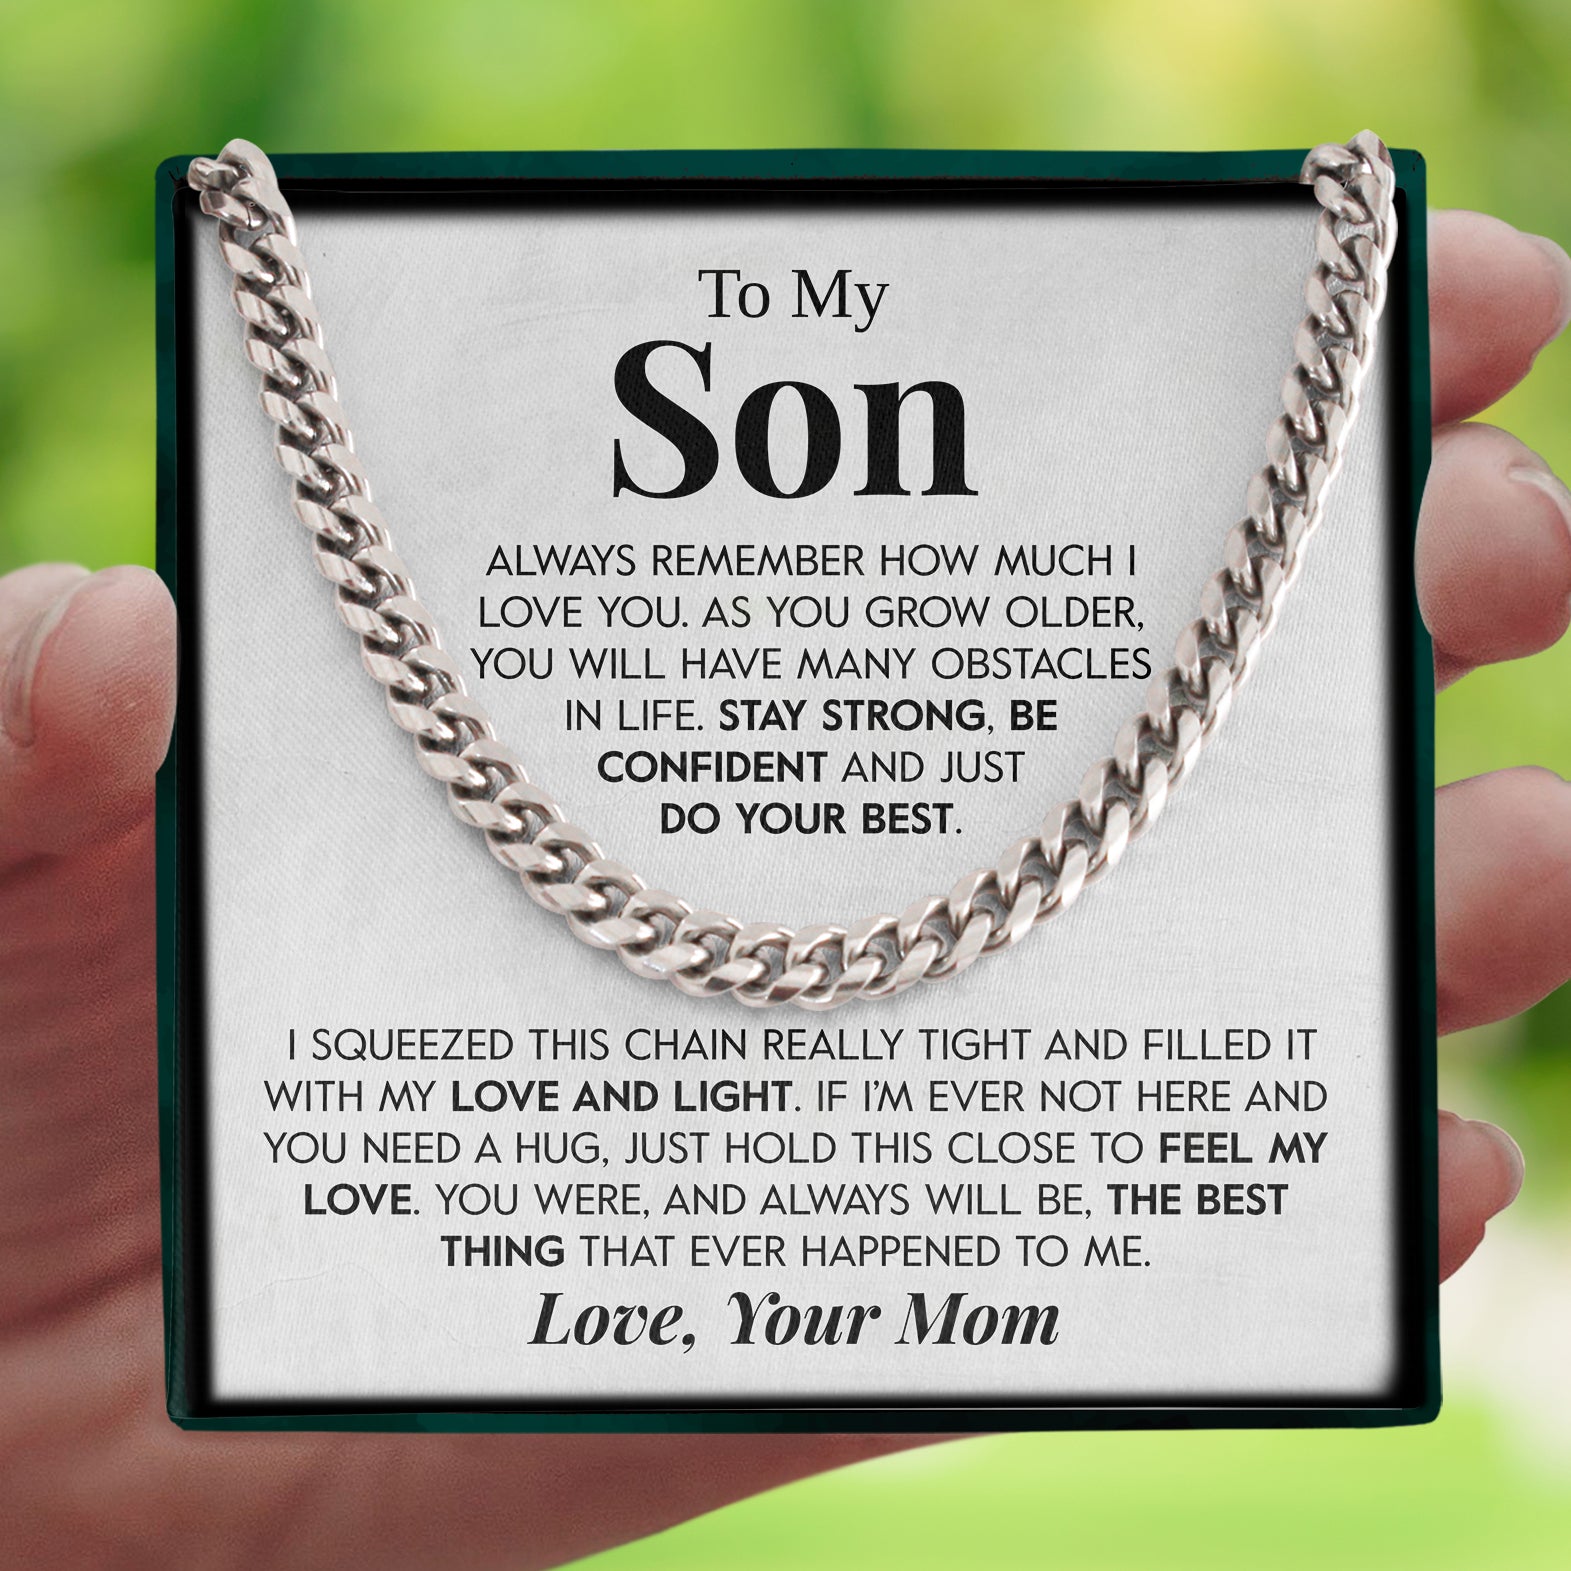 To My Son | "Do Your Best" | Cuban Chain Link